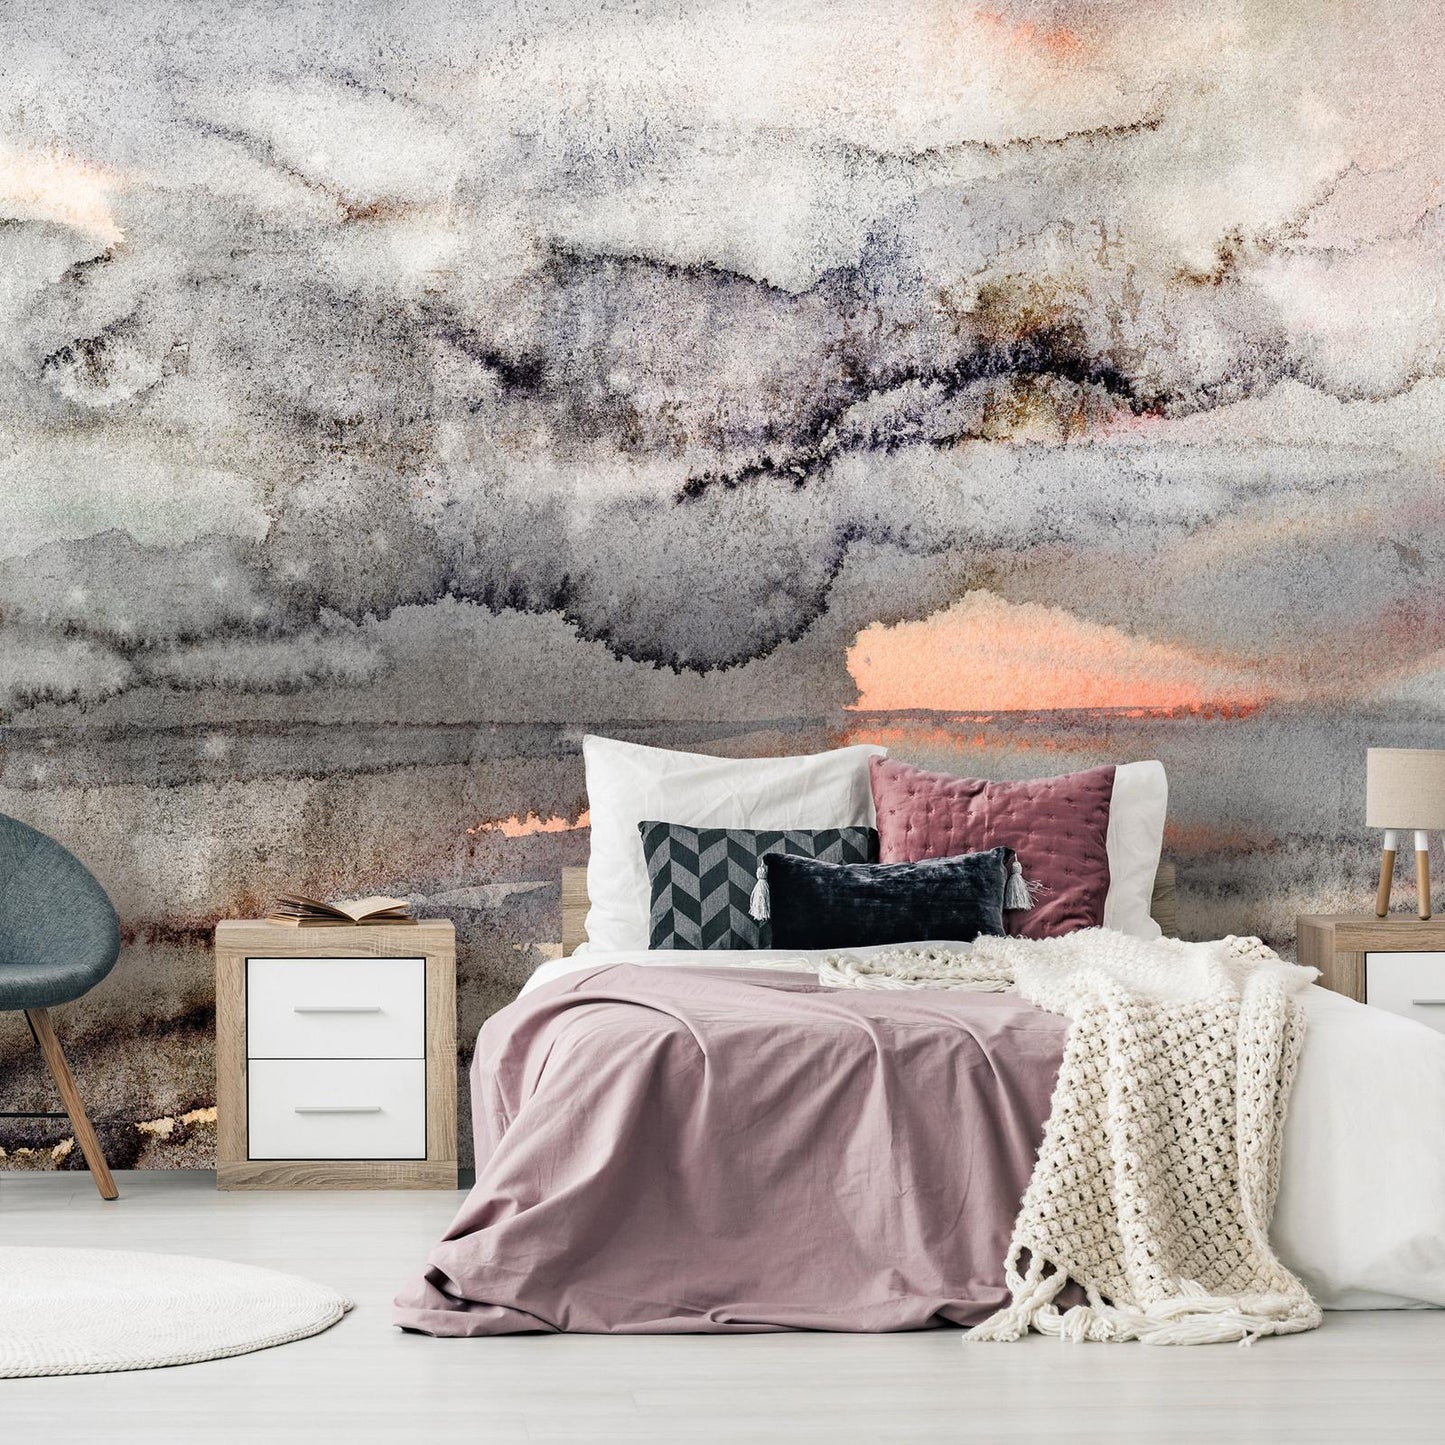 Wall Mural - Connected Clouds